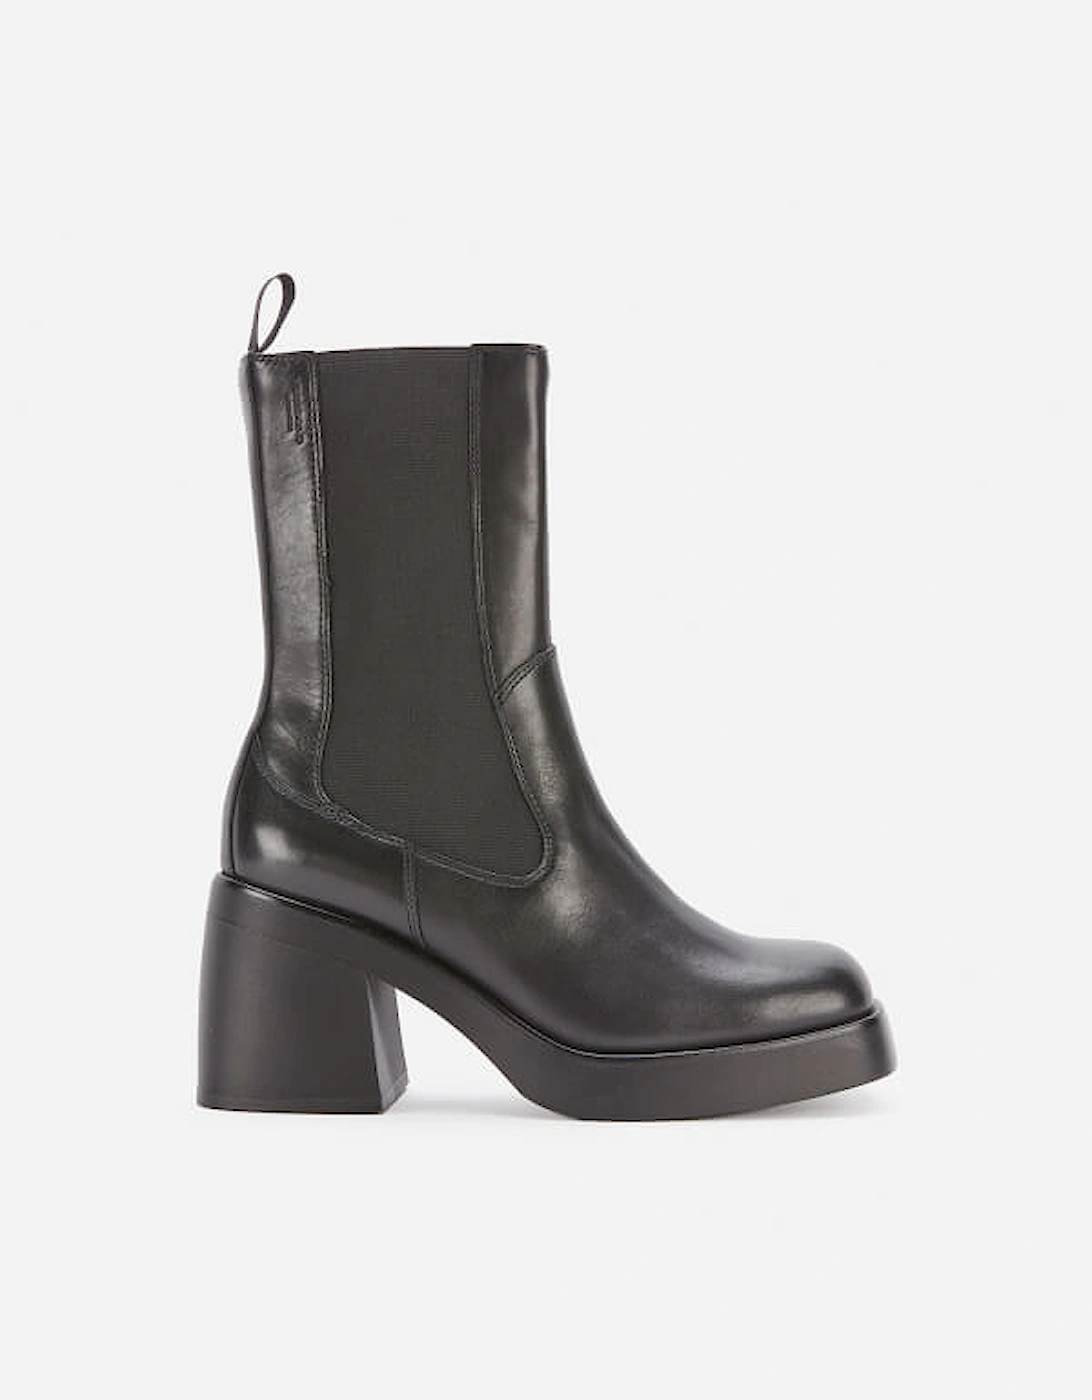 Women's Brooke Leather Heeled Chelsea Boots - Black - - Home - Women's Shoes - Women's Boots - Women's Heeled Boots - Women's Brooke Leather Heeled Chelsea Boots - Black, 3 of 2